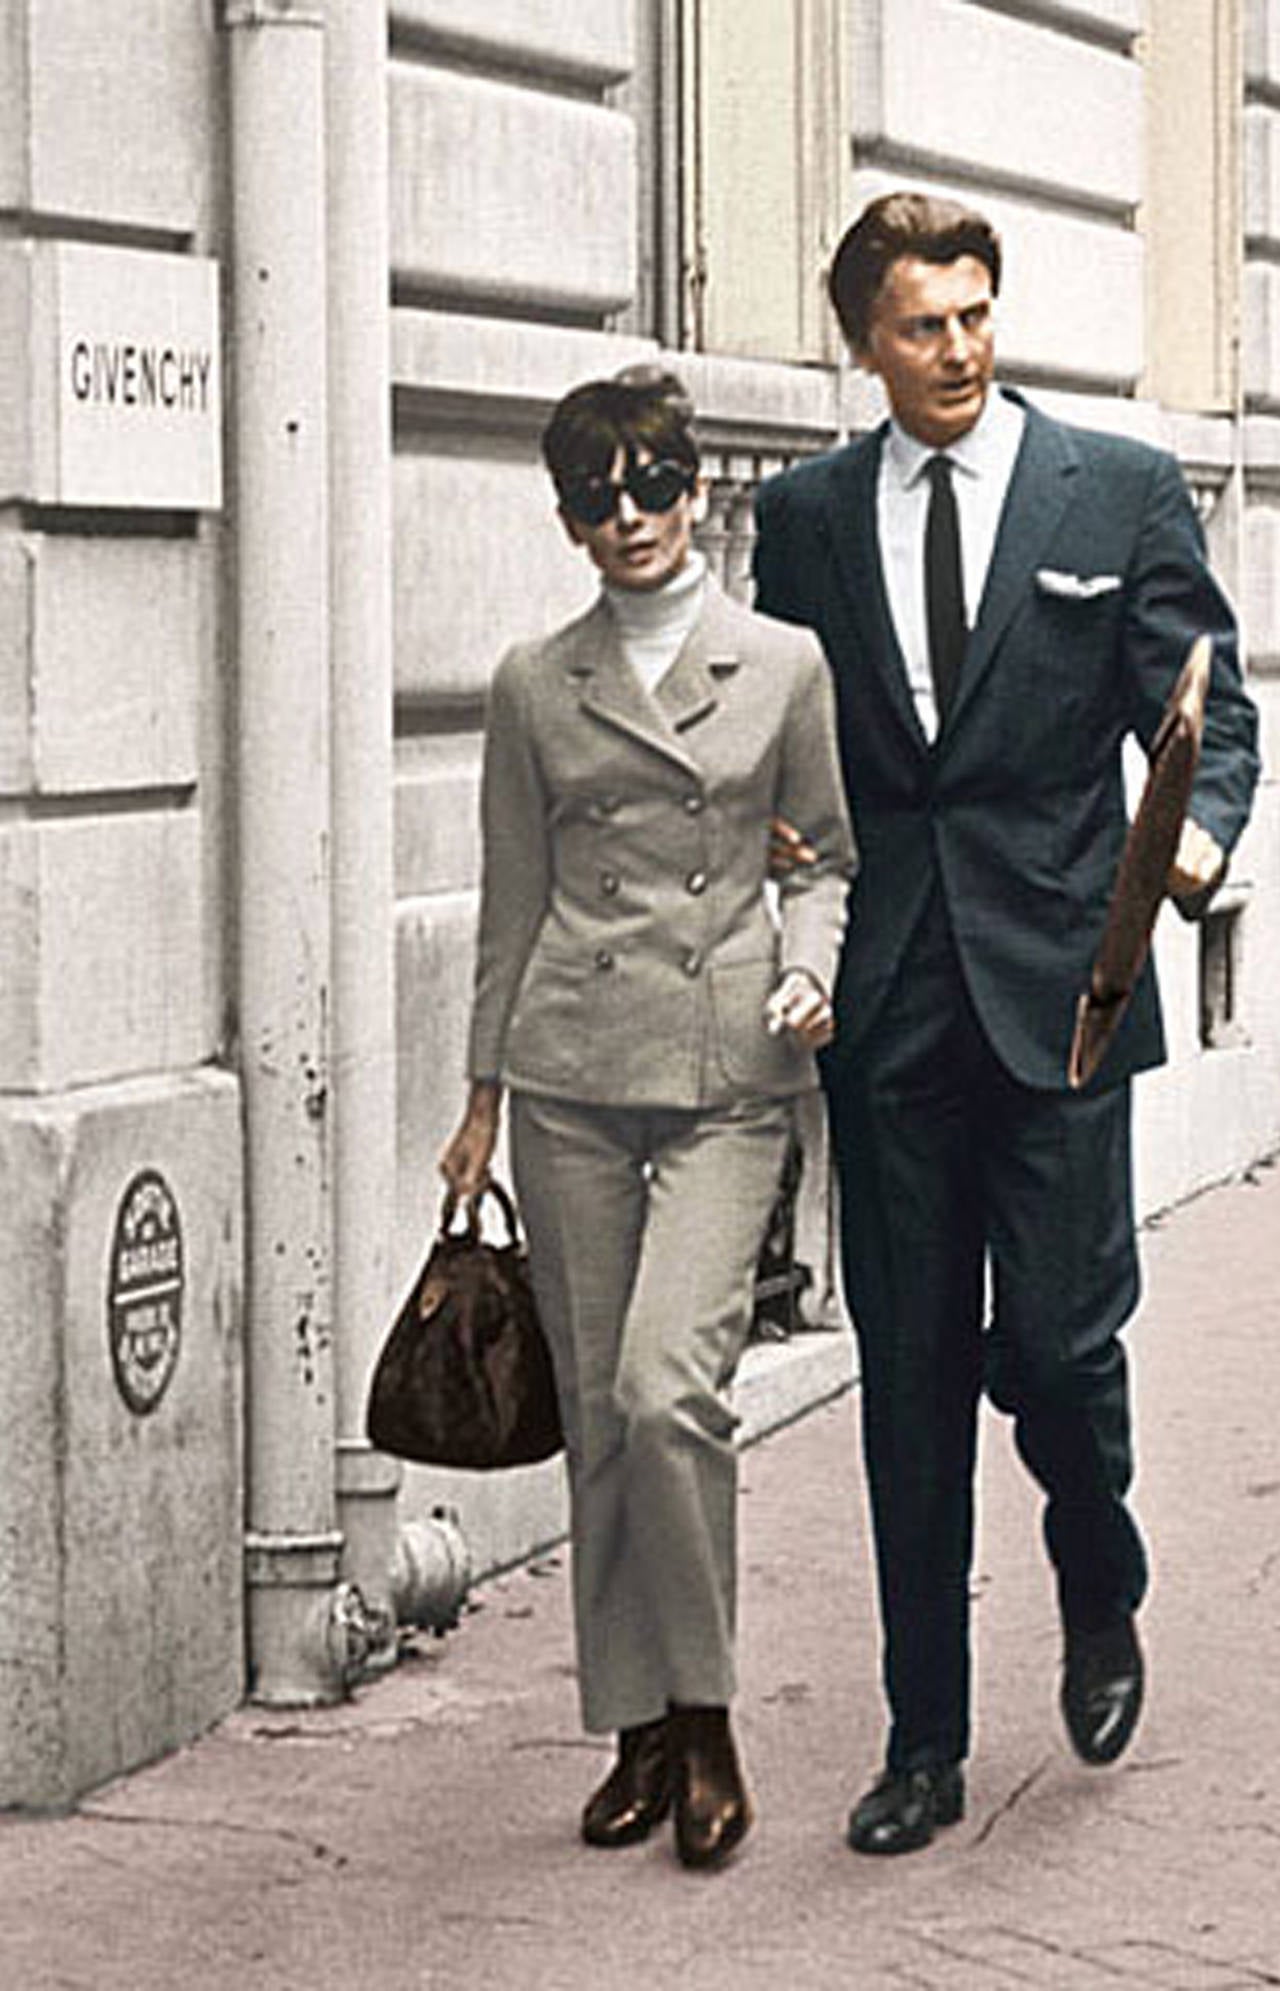 A brilliant late 60s Givenchy corduroy trouser suit. The suit includes a high standing collared jacket with cinched in waist and high waisted cropped flared pants. Audrey Hepburn wore a lot of Givenchy's trouser suit during this period and was one